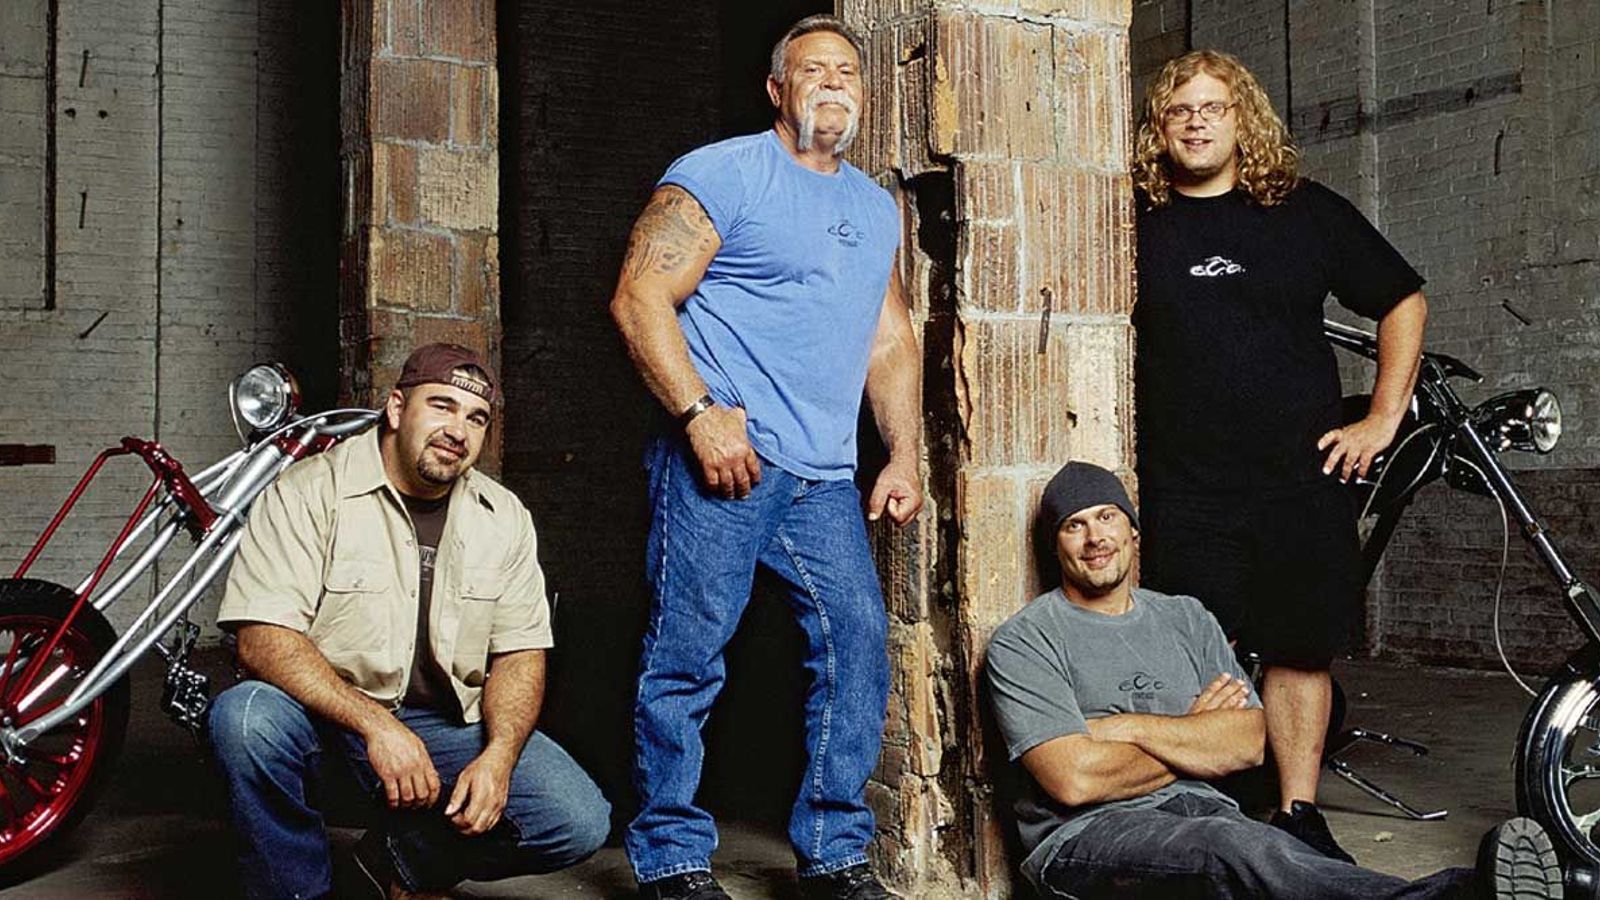 voldsom Forud type par Here's What The Original Cast Of American Chopper Is Up To Today